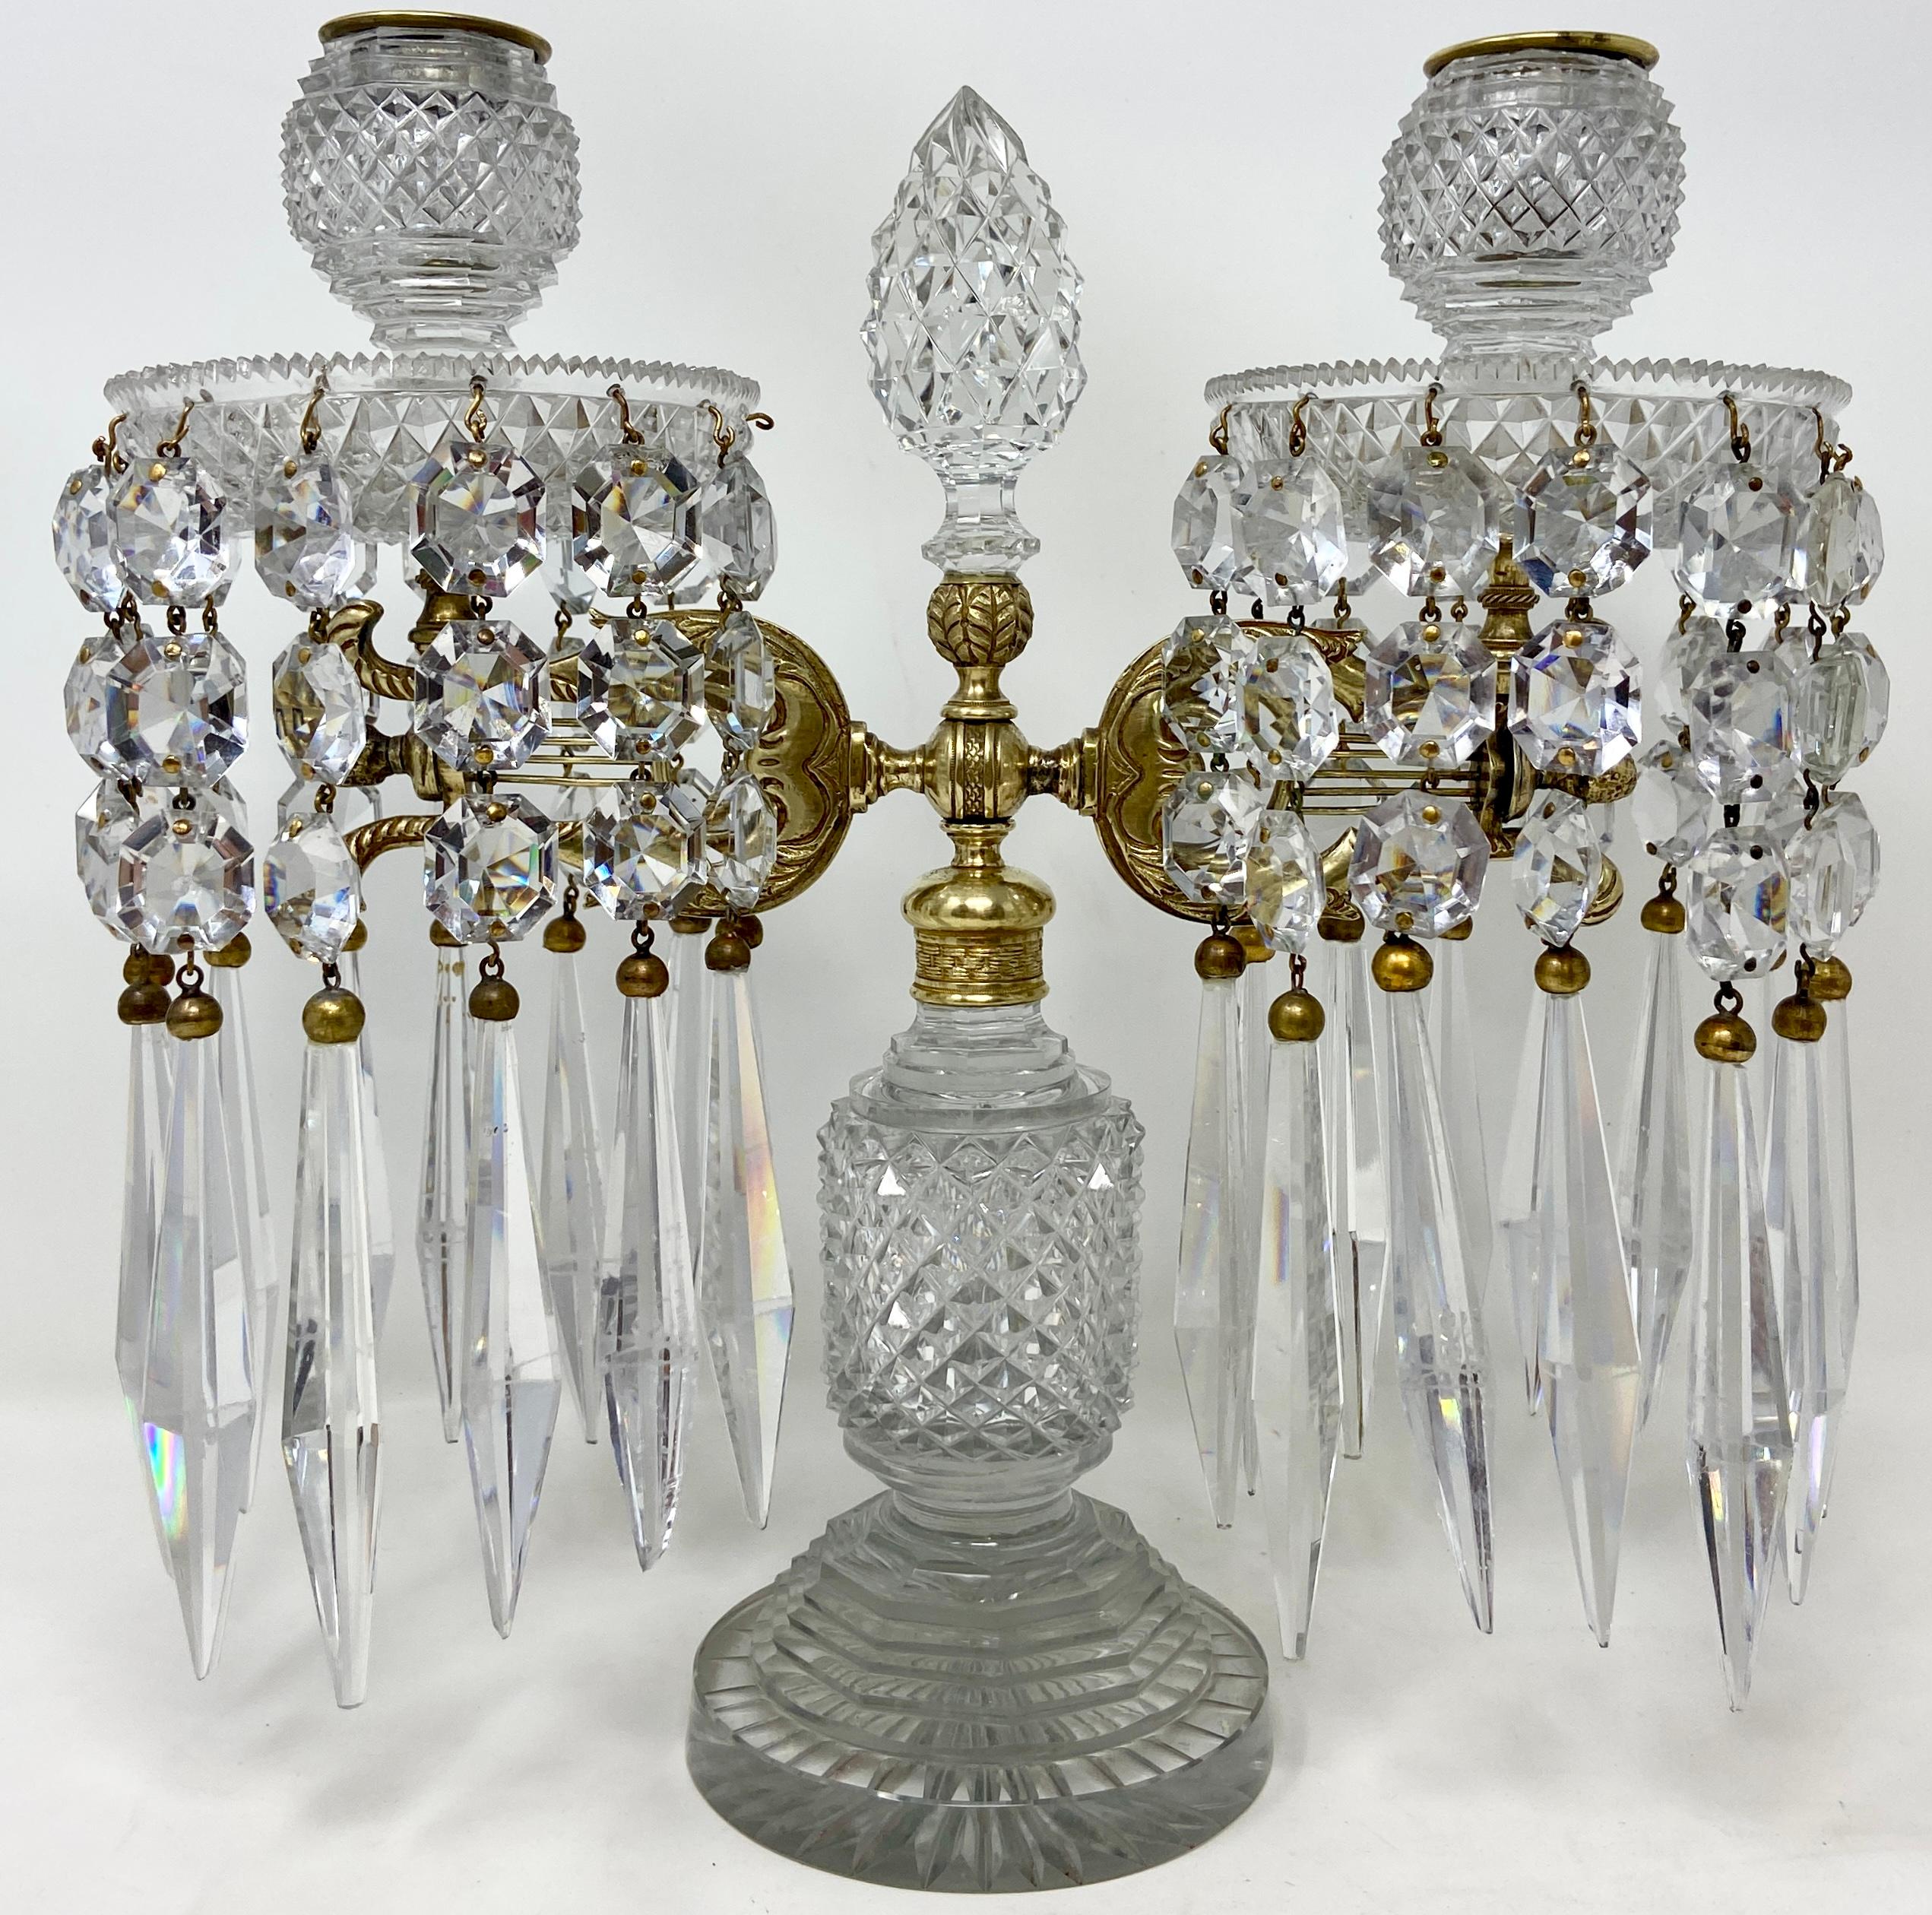 Pair splendid Antique French Baccarat crystal and gold bronze candelabra, Circa 1860. Beautiful crystal draping.